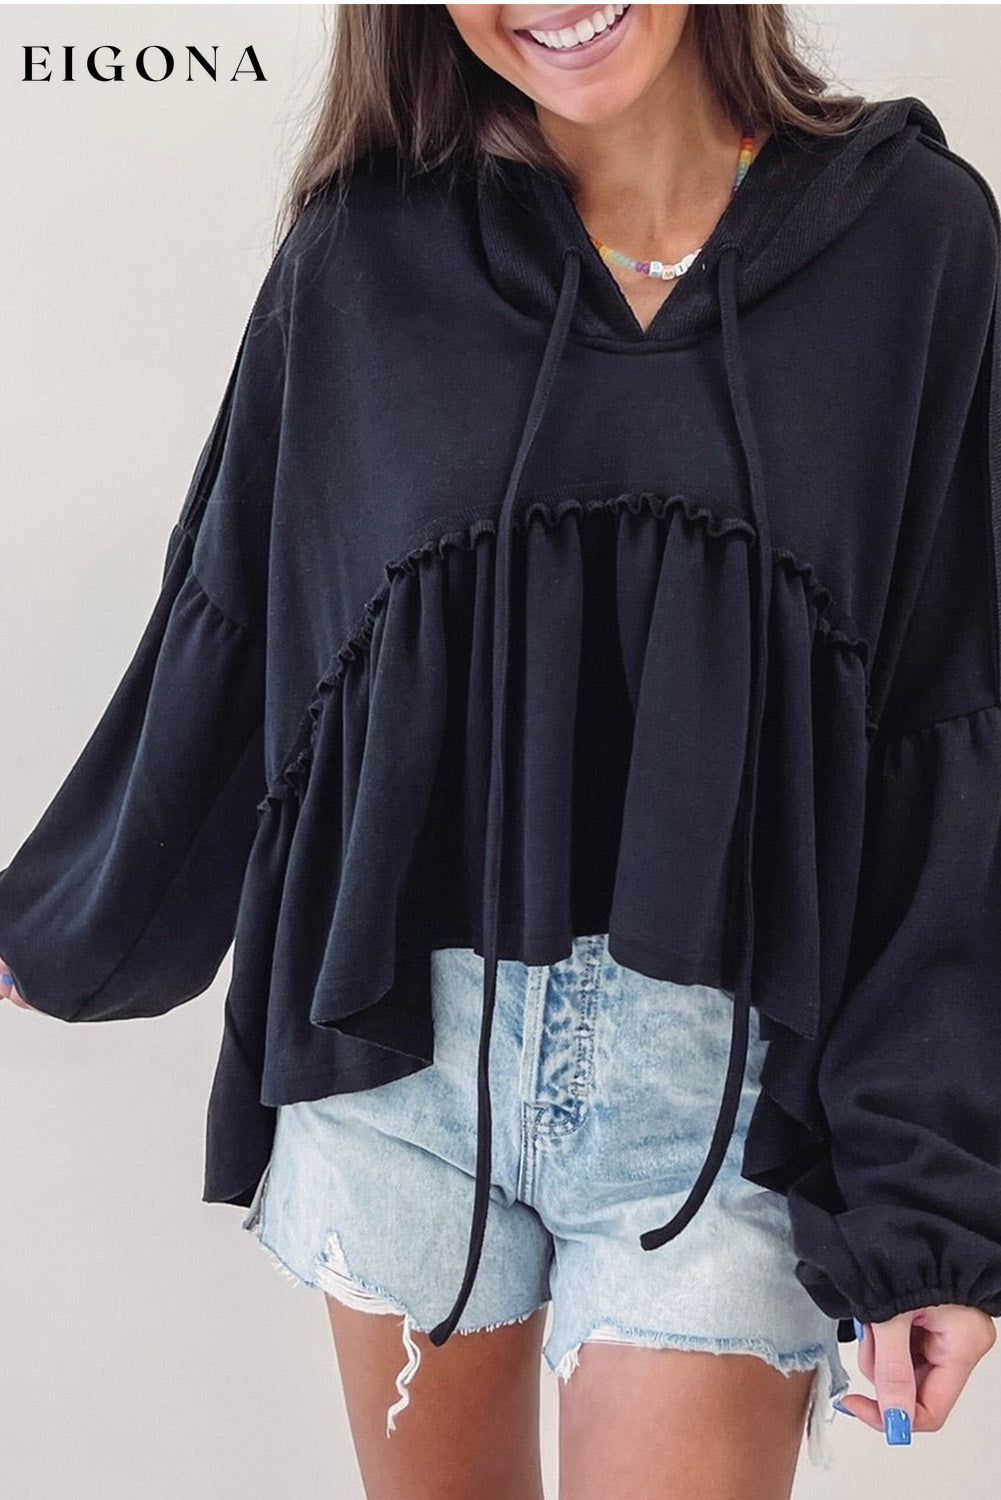 Black Oversized Ruffled High Low Hem Drop Shoulder Hoodie All In Stock clothes long sleeve top Occasion Daily Print Solid Color Season Spring Style Casual sweater sweaters top tops